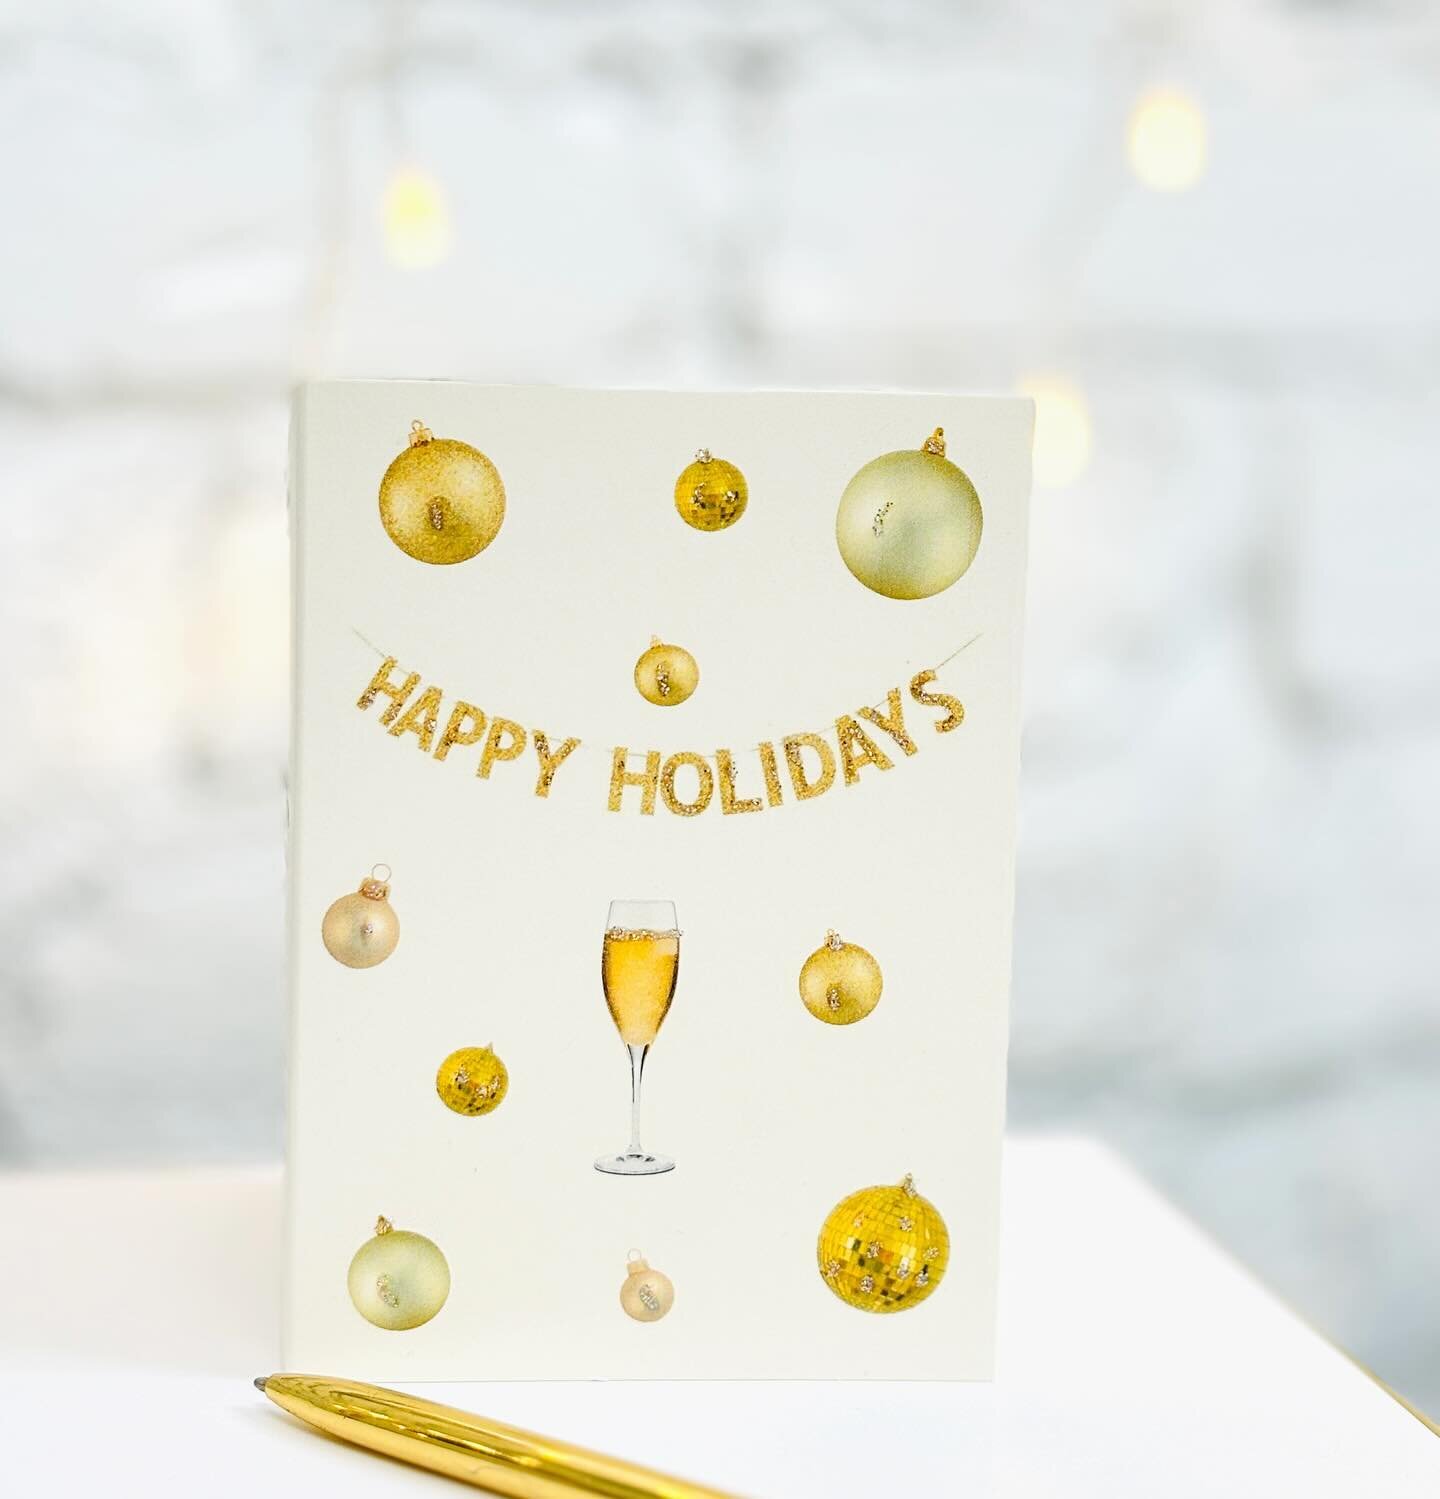 Gold, glitter &amp; champagne 🥂 for the holidays! #holidaycards #sendacardnotjustatext 🤍